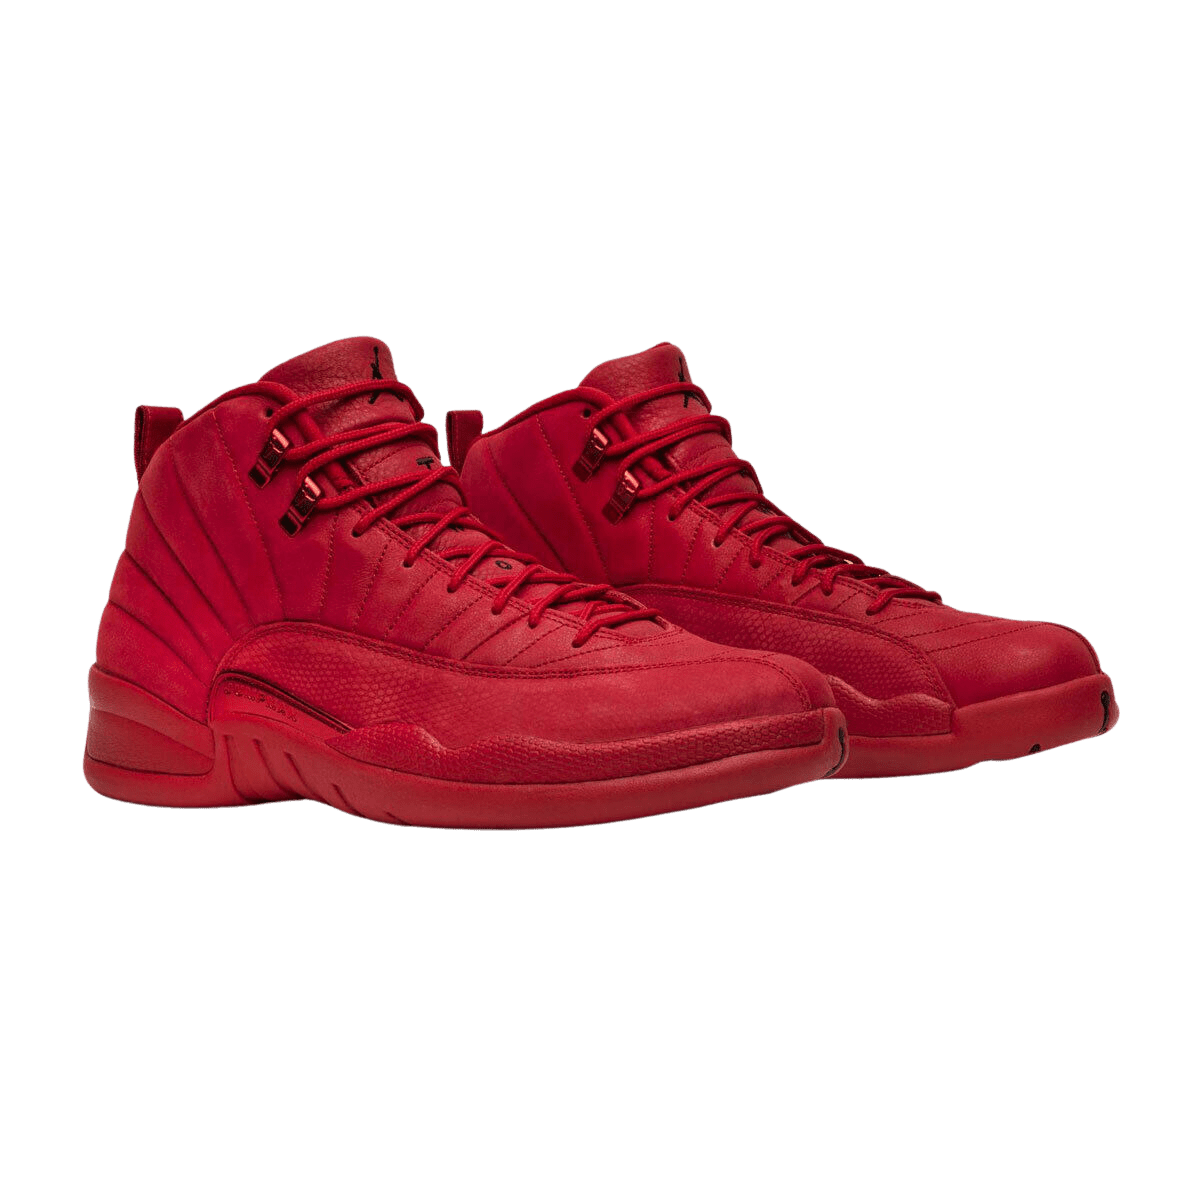 Air Jordan 12 Red Sneakers Harness the Fire of the Sun